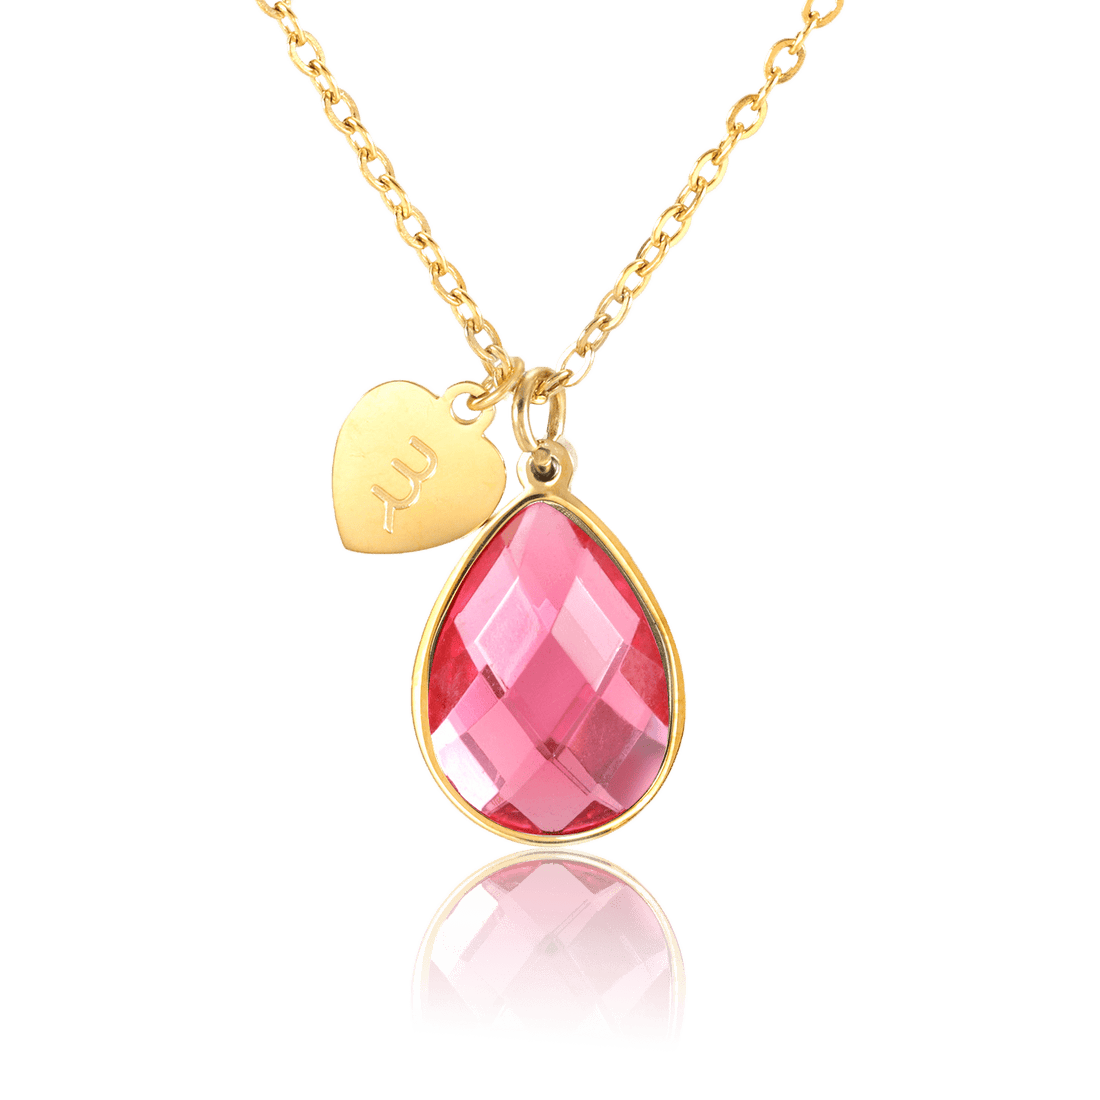 bianco rosso Necklaces Gold October Birthstone - Pink Tourmaline cyprus greece jewelry gift free shipping europe worldwide